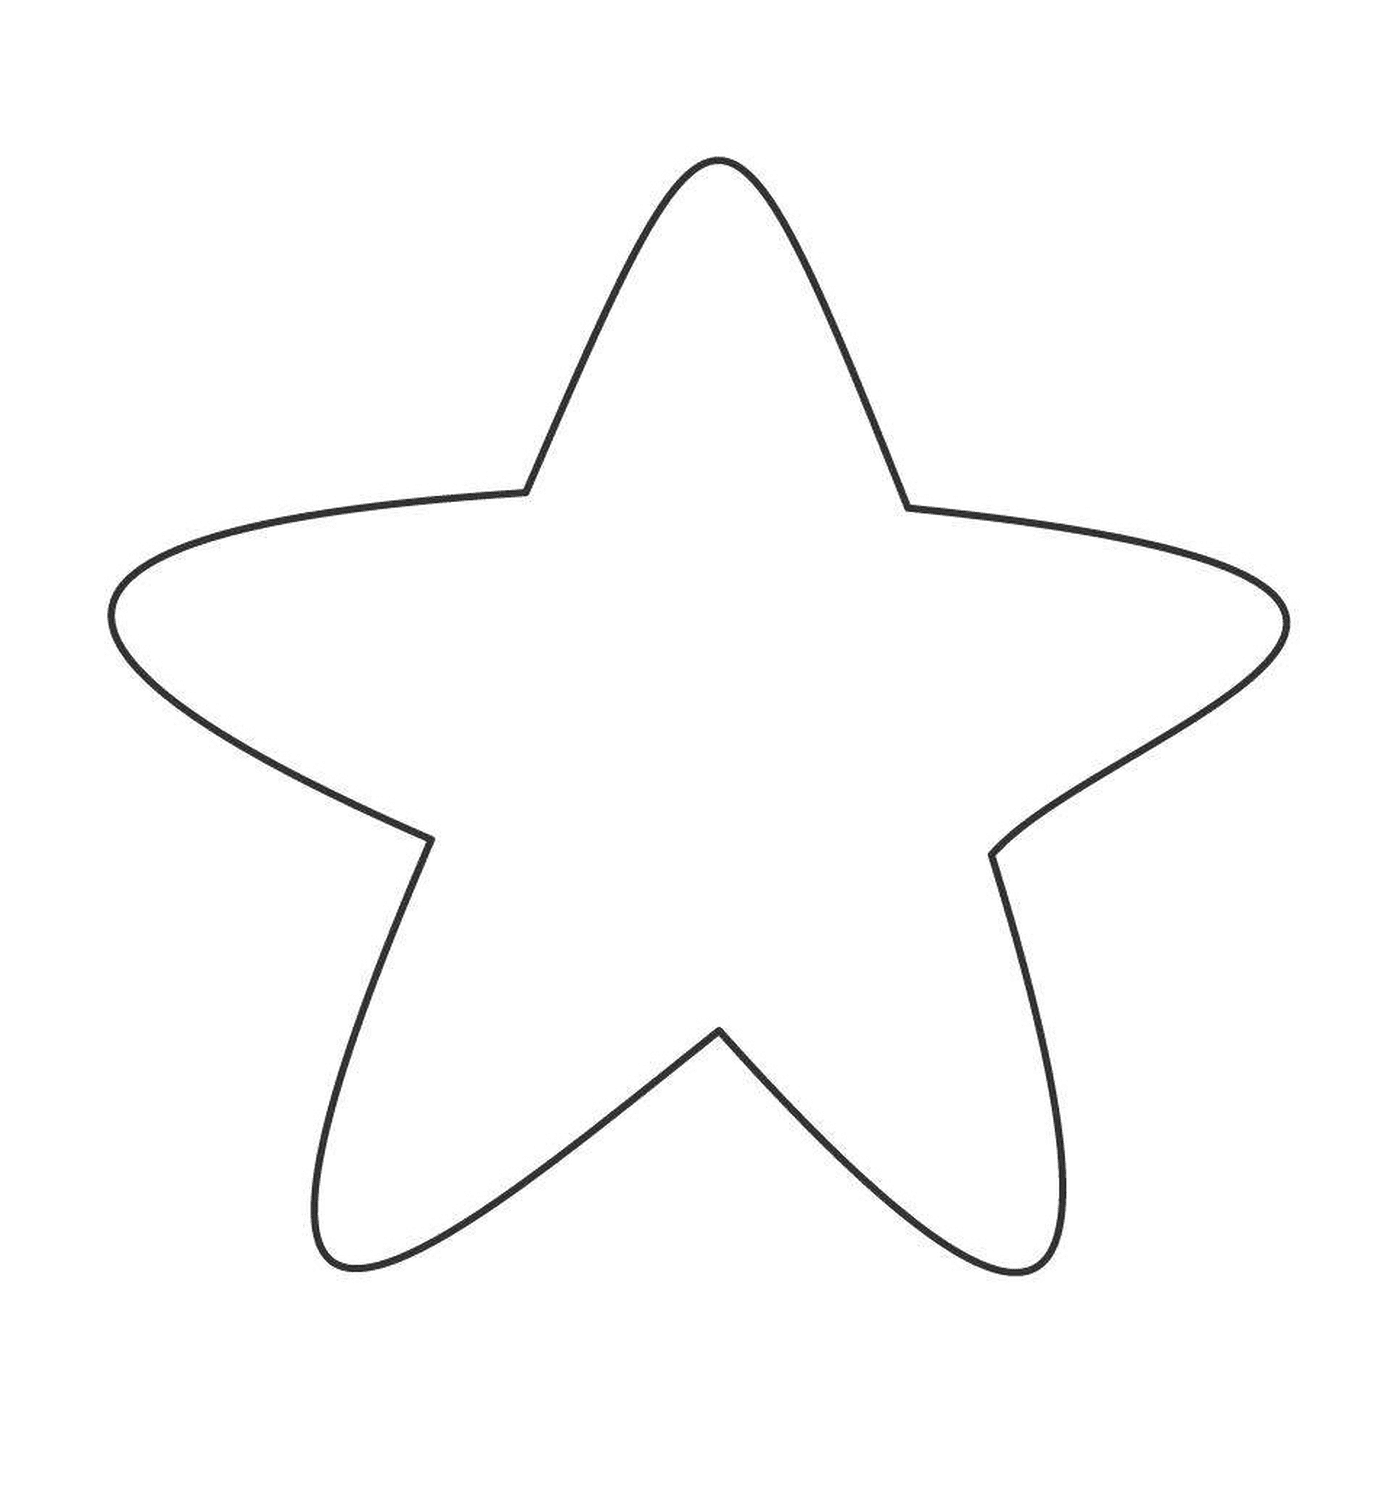  A rounded star 